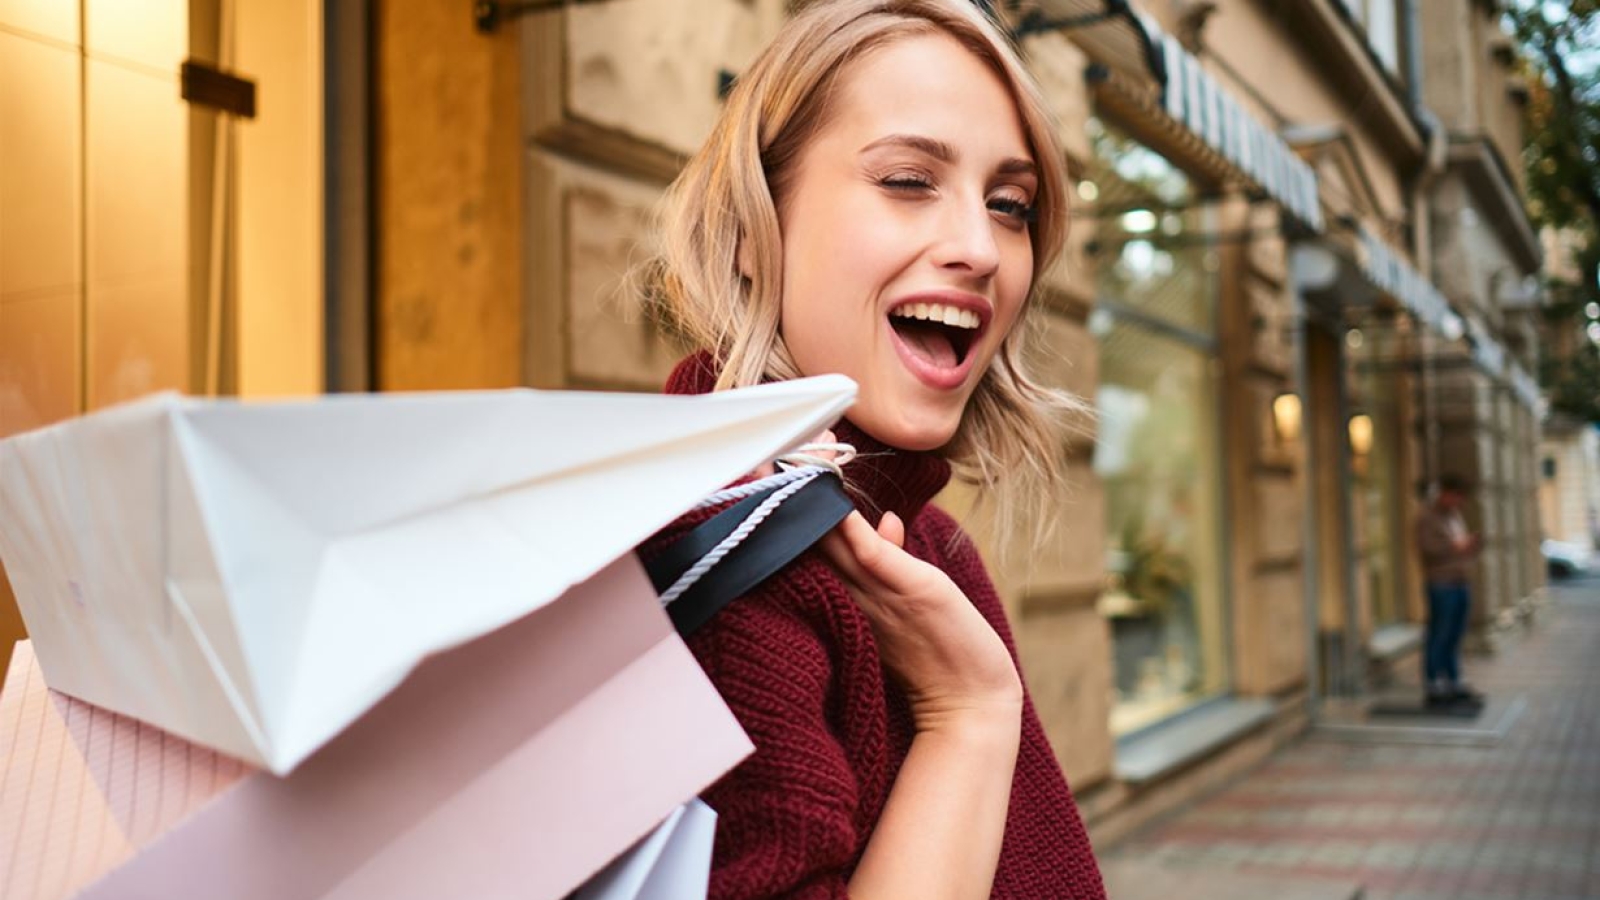 portrait-cheerful-blond-girl-with-shopping-bags-happily-winking-out-city-street2-min